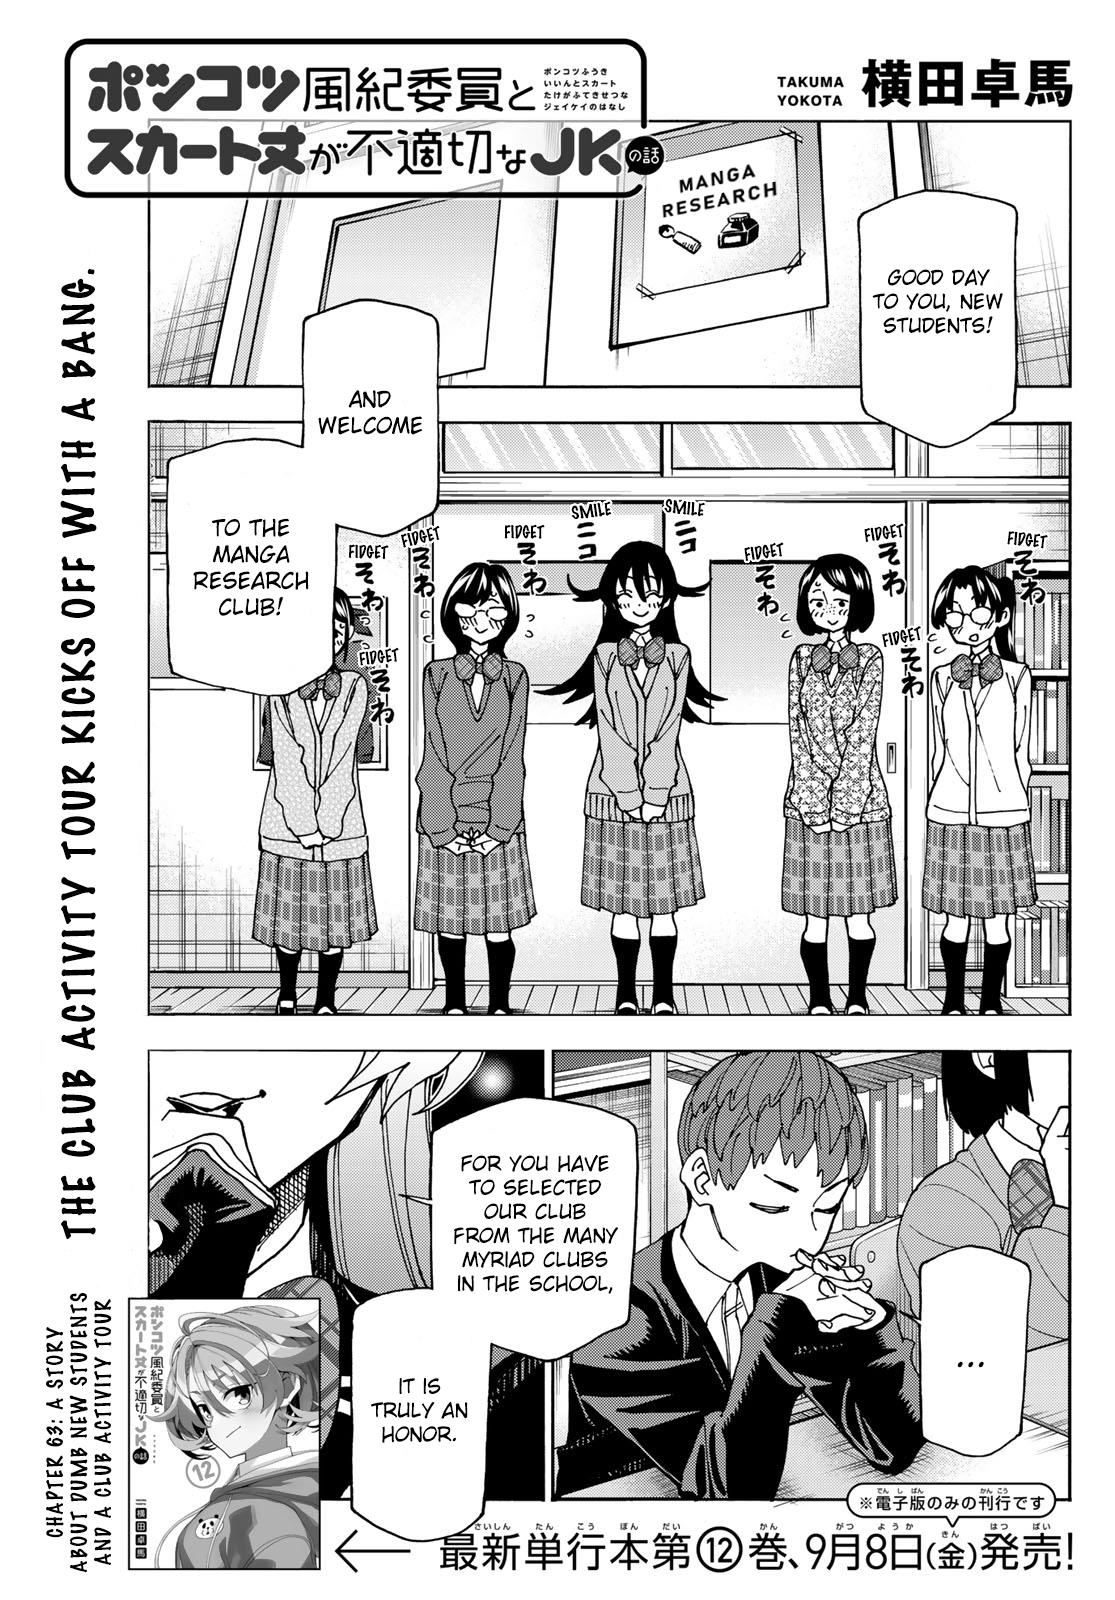 The Story Between A Dumb Prefect And A High School Girl With An Inappropriate Skirt Length - Page 1